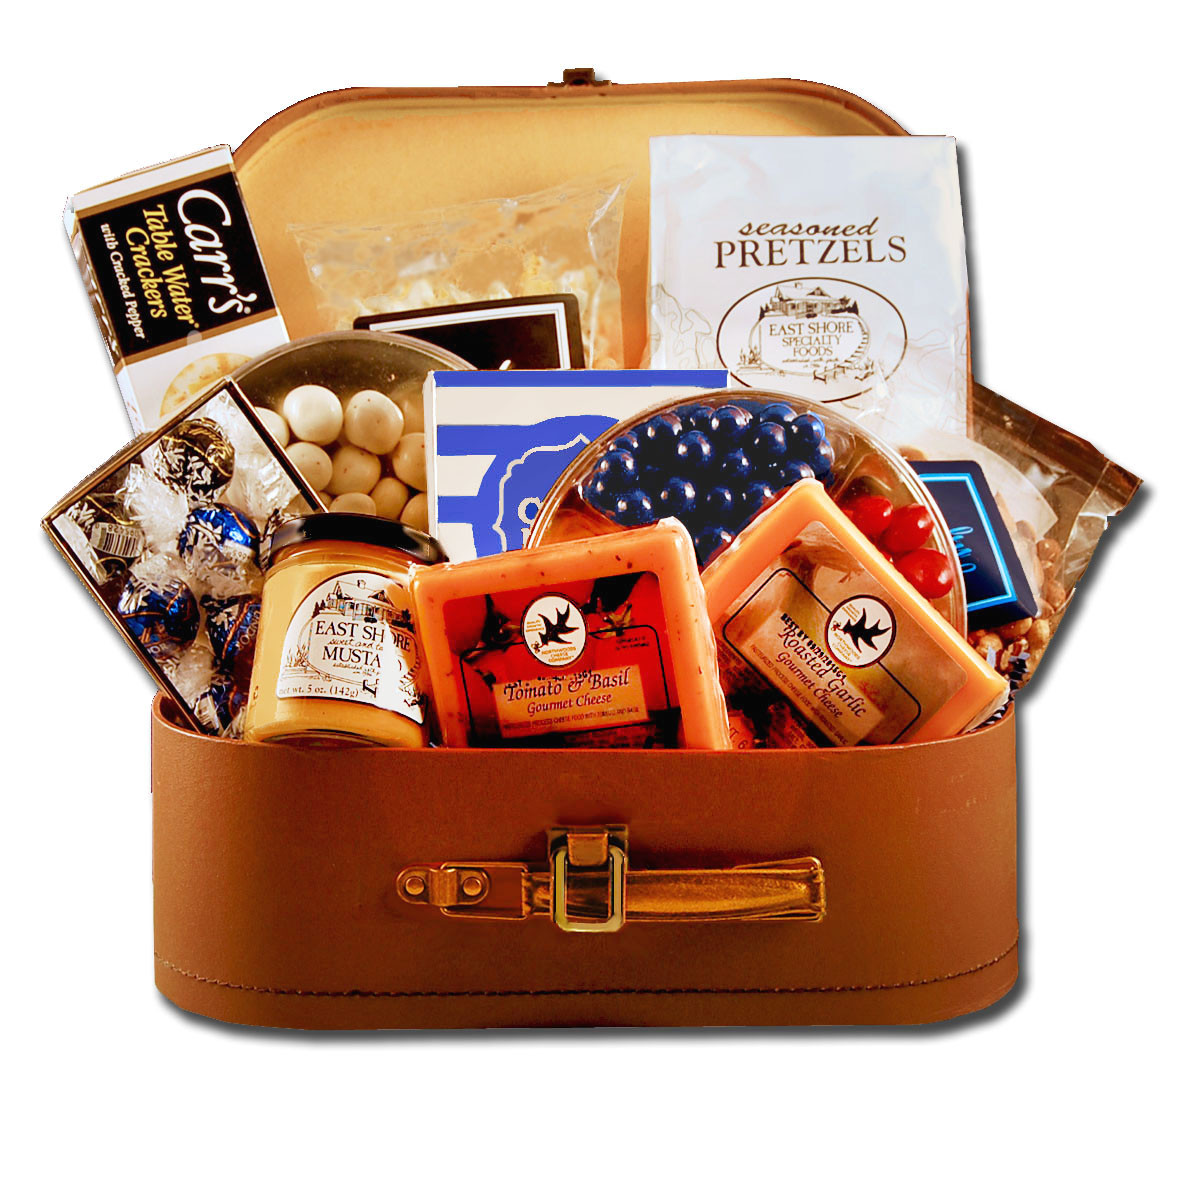 Travel themed gift basket arrangement with chocolates, sweet and salty snacks, dried fruit, caramels, and cookies